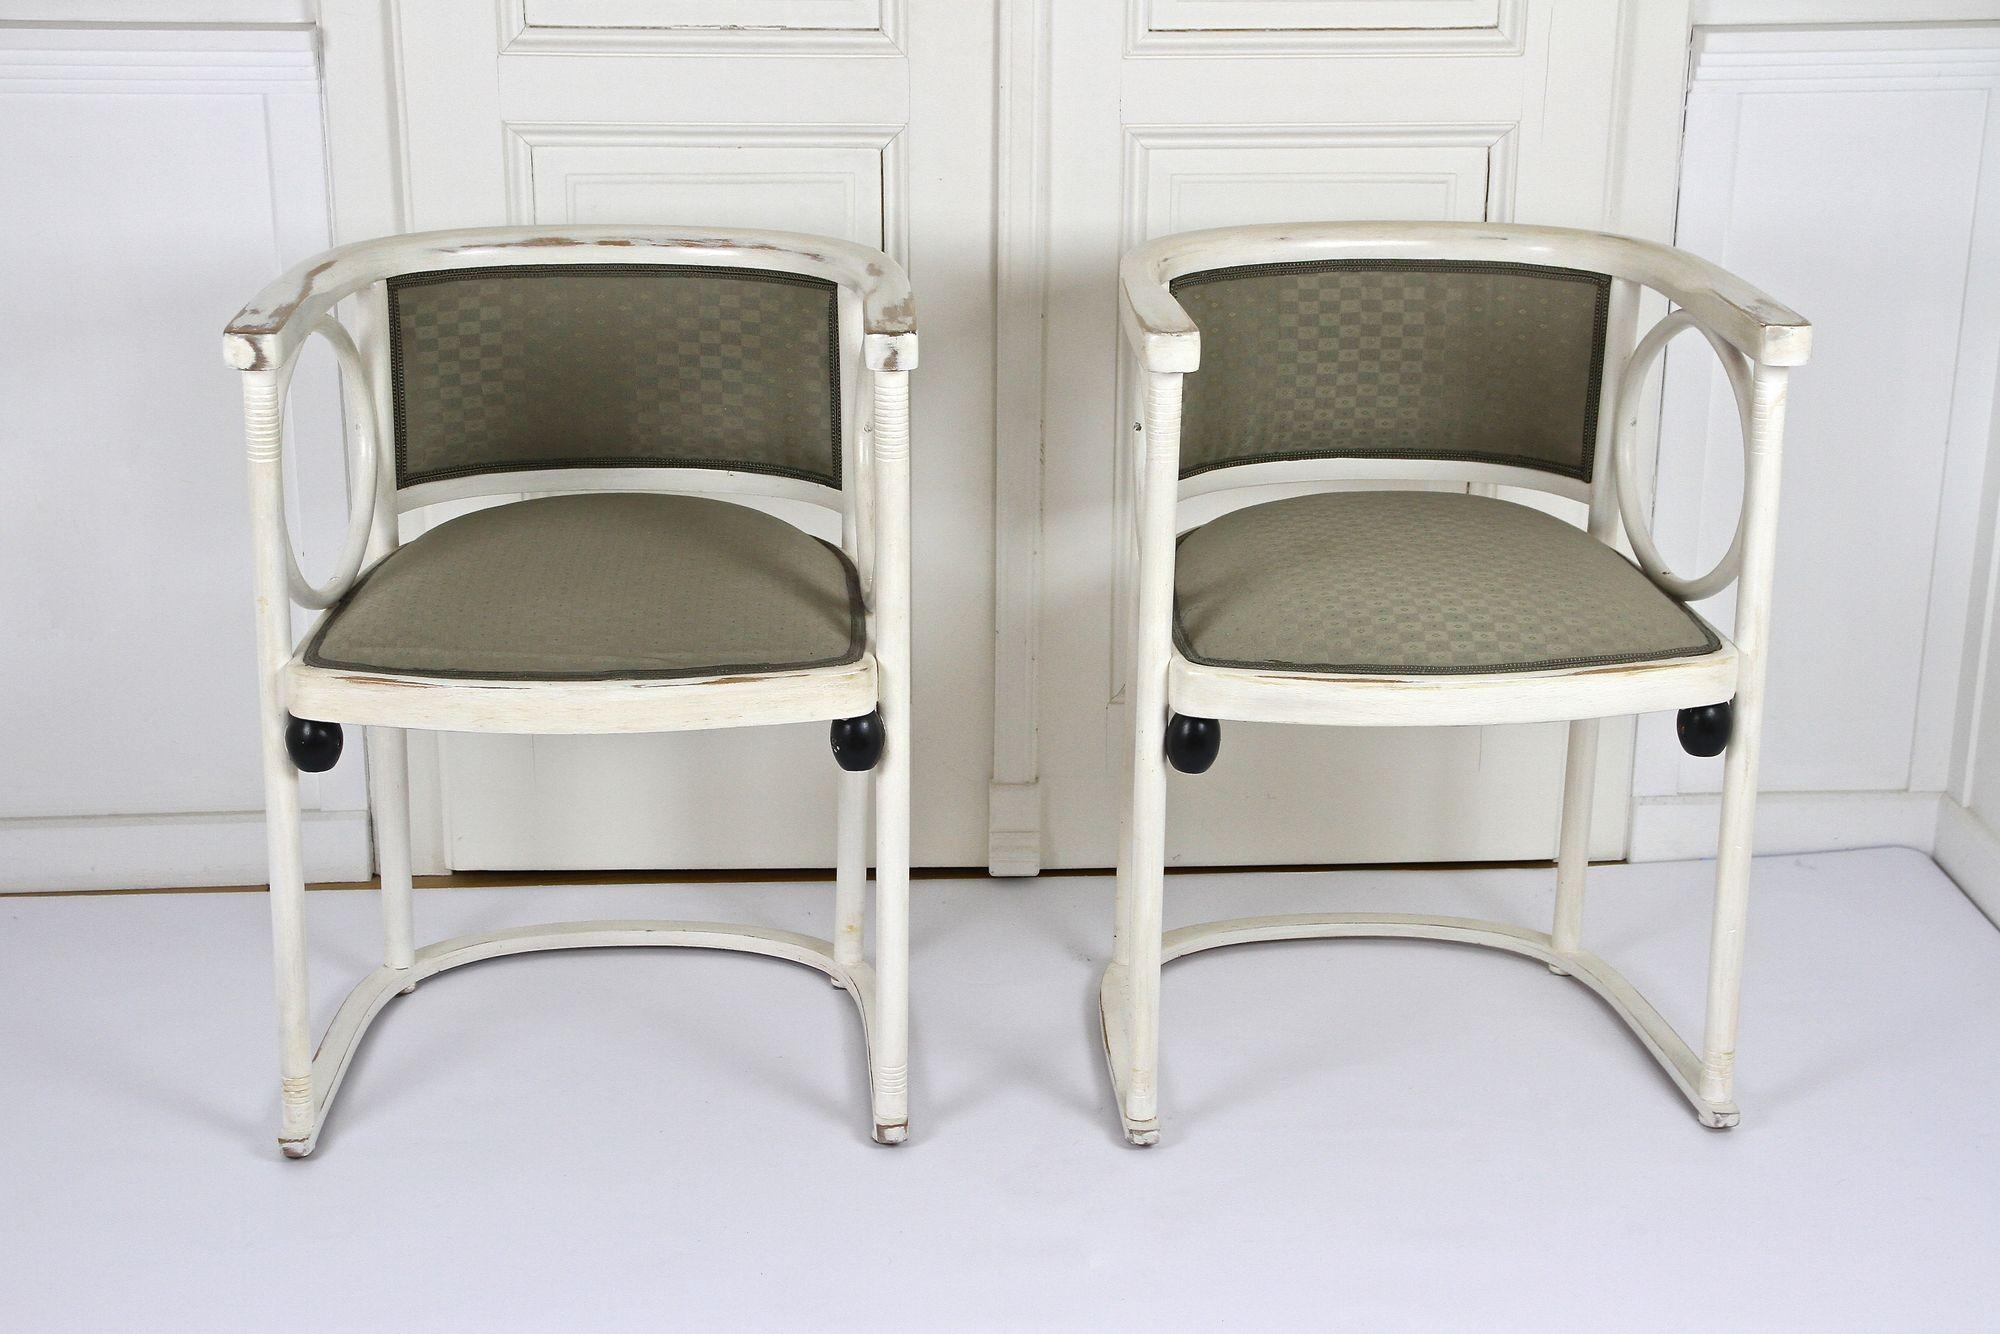 Fantastic pair of white Art Nouveau Thonet armchairs from the period around 1905 in Austria. The timeless design of this iconic Art Nouveau armchairs comes from the pen of no other than the world-famous Austrian architect and pioneer of modern